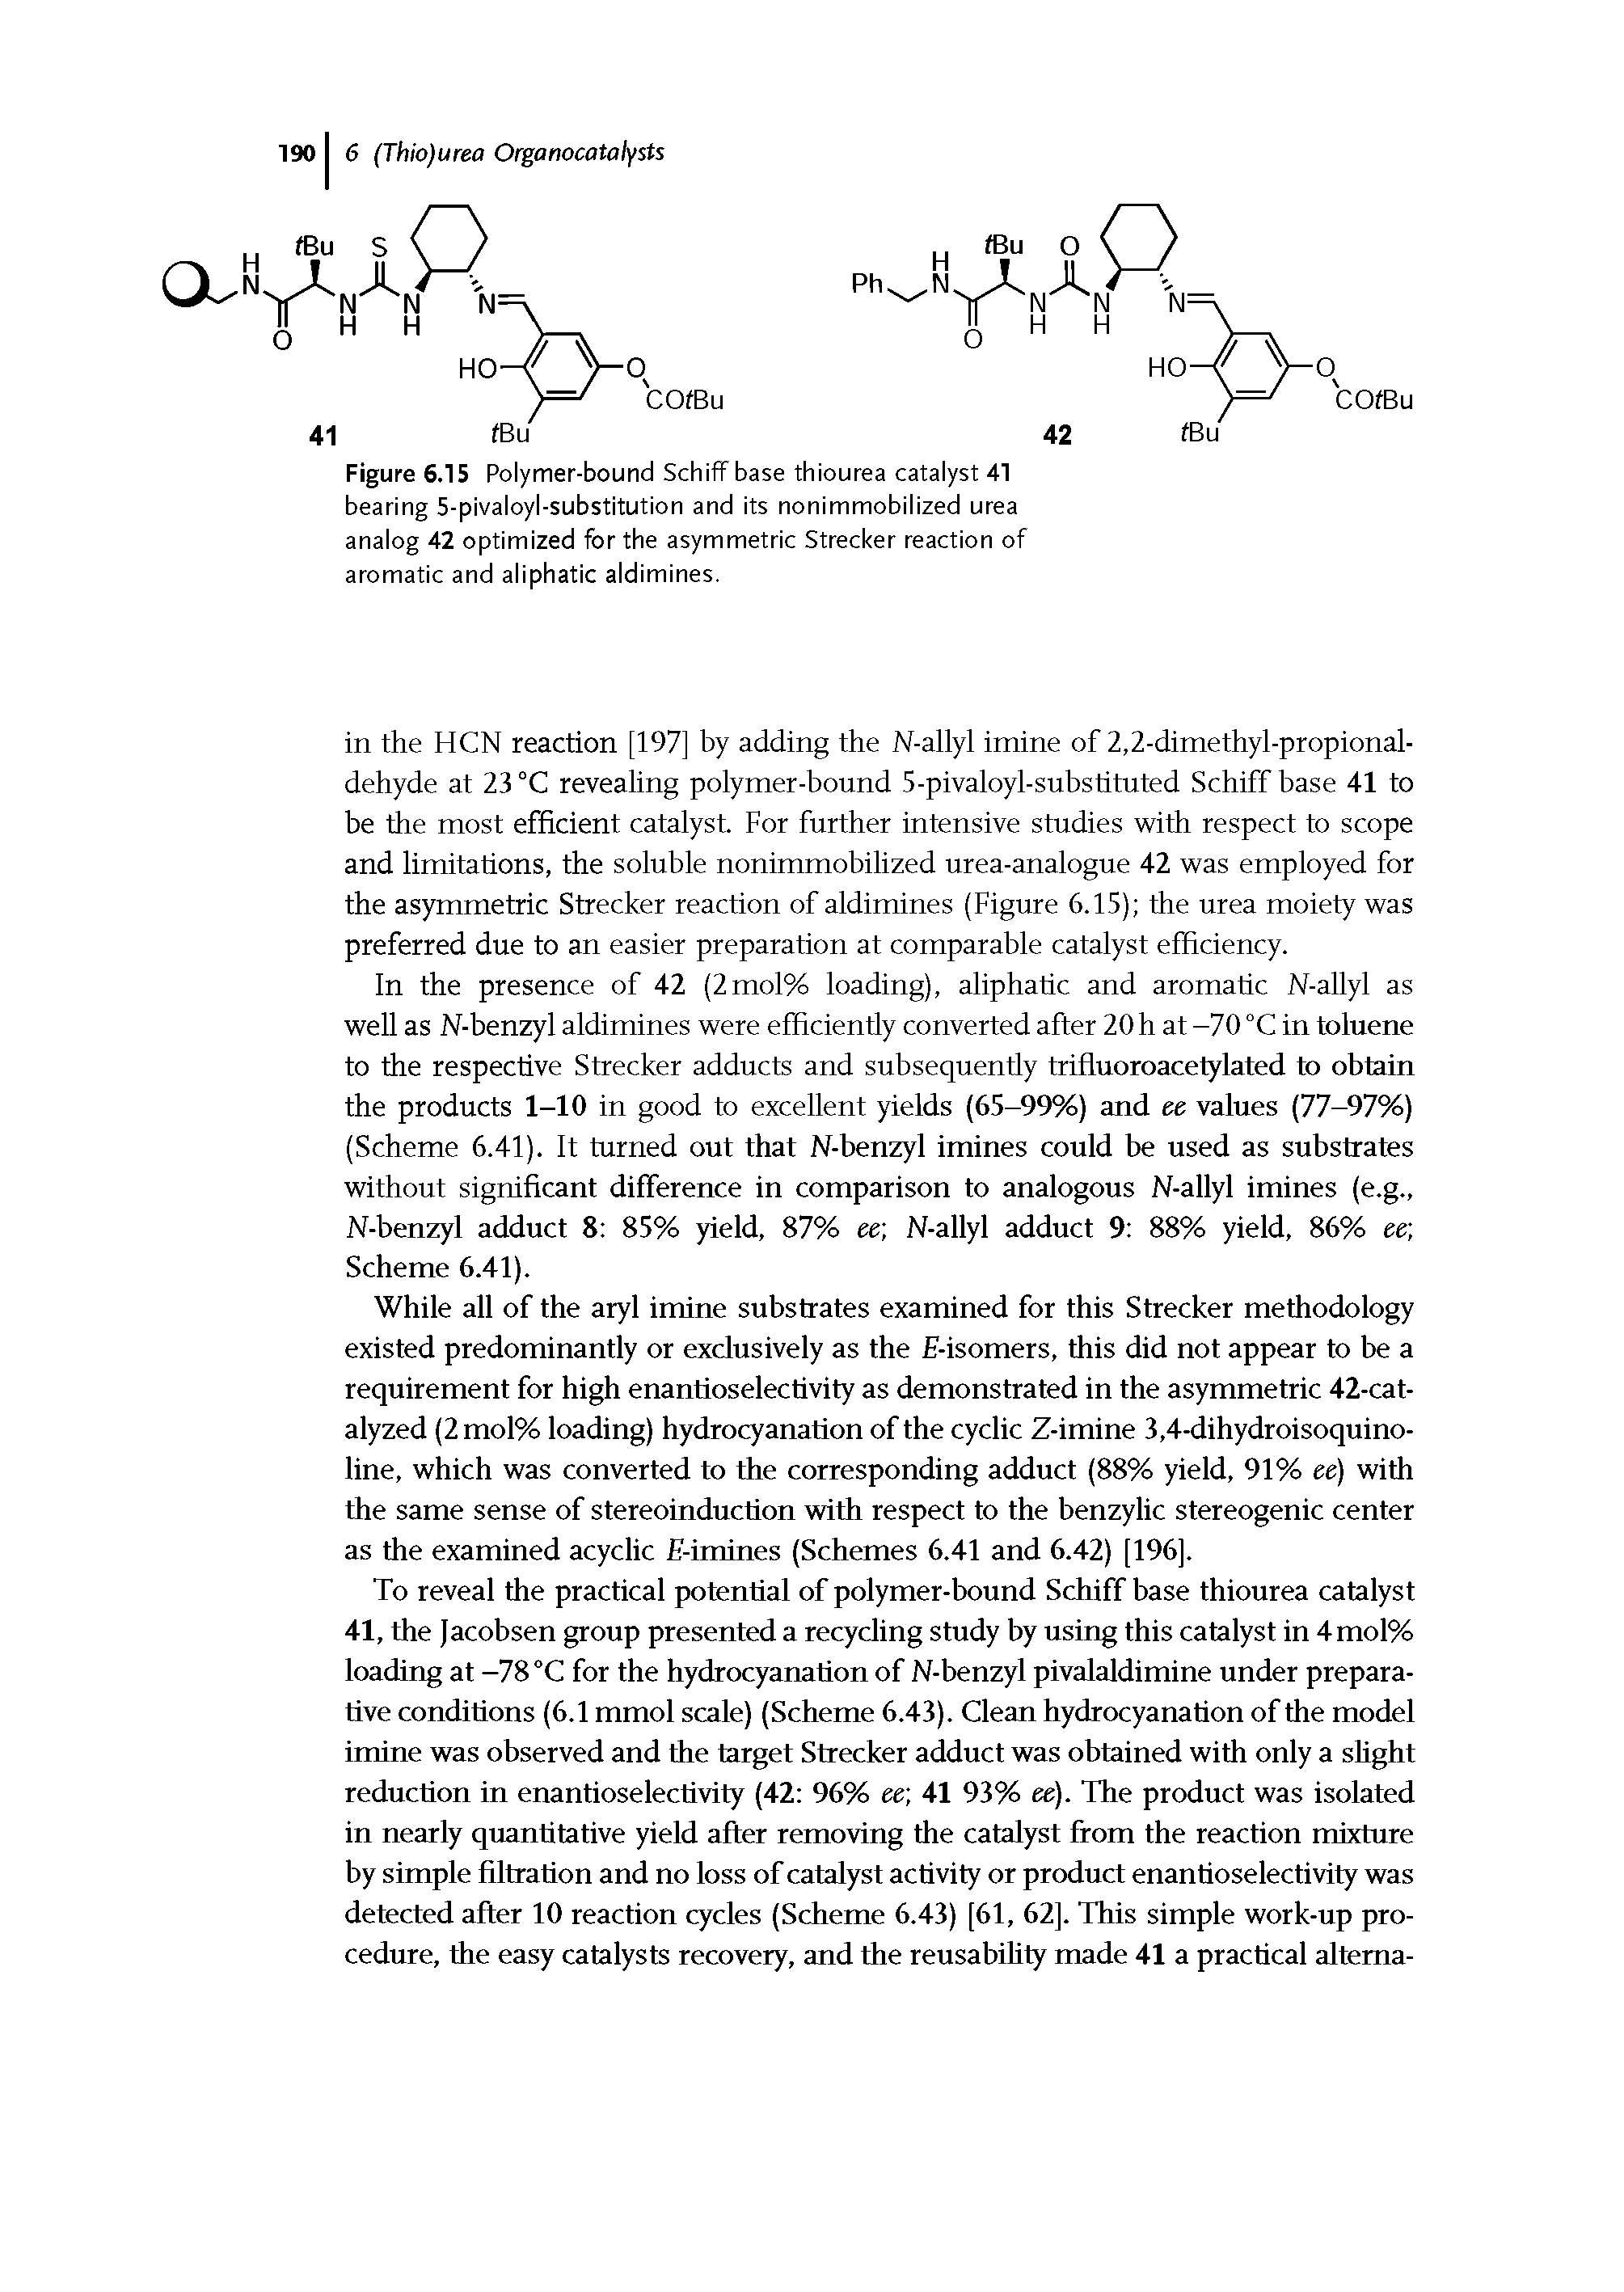 Figure 6.15 Polymer-bound Schiff base thiourea catalyst 41 bearing 5-pivaloyl-substitution and its nonimmobilized urea analog 42 optimized for the asymmetric Strecker reaction of aromatic and aliphatic aldimines.